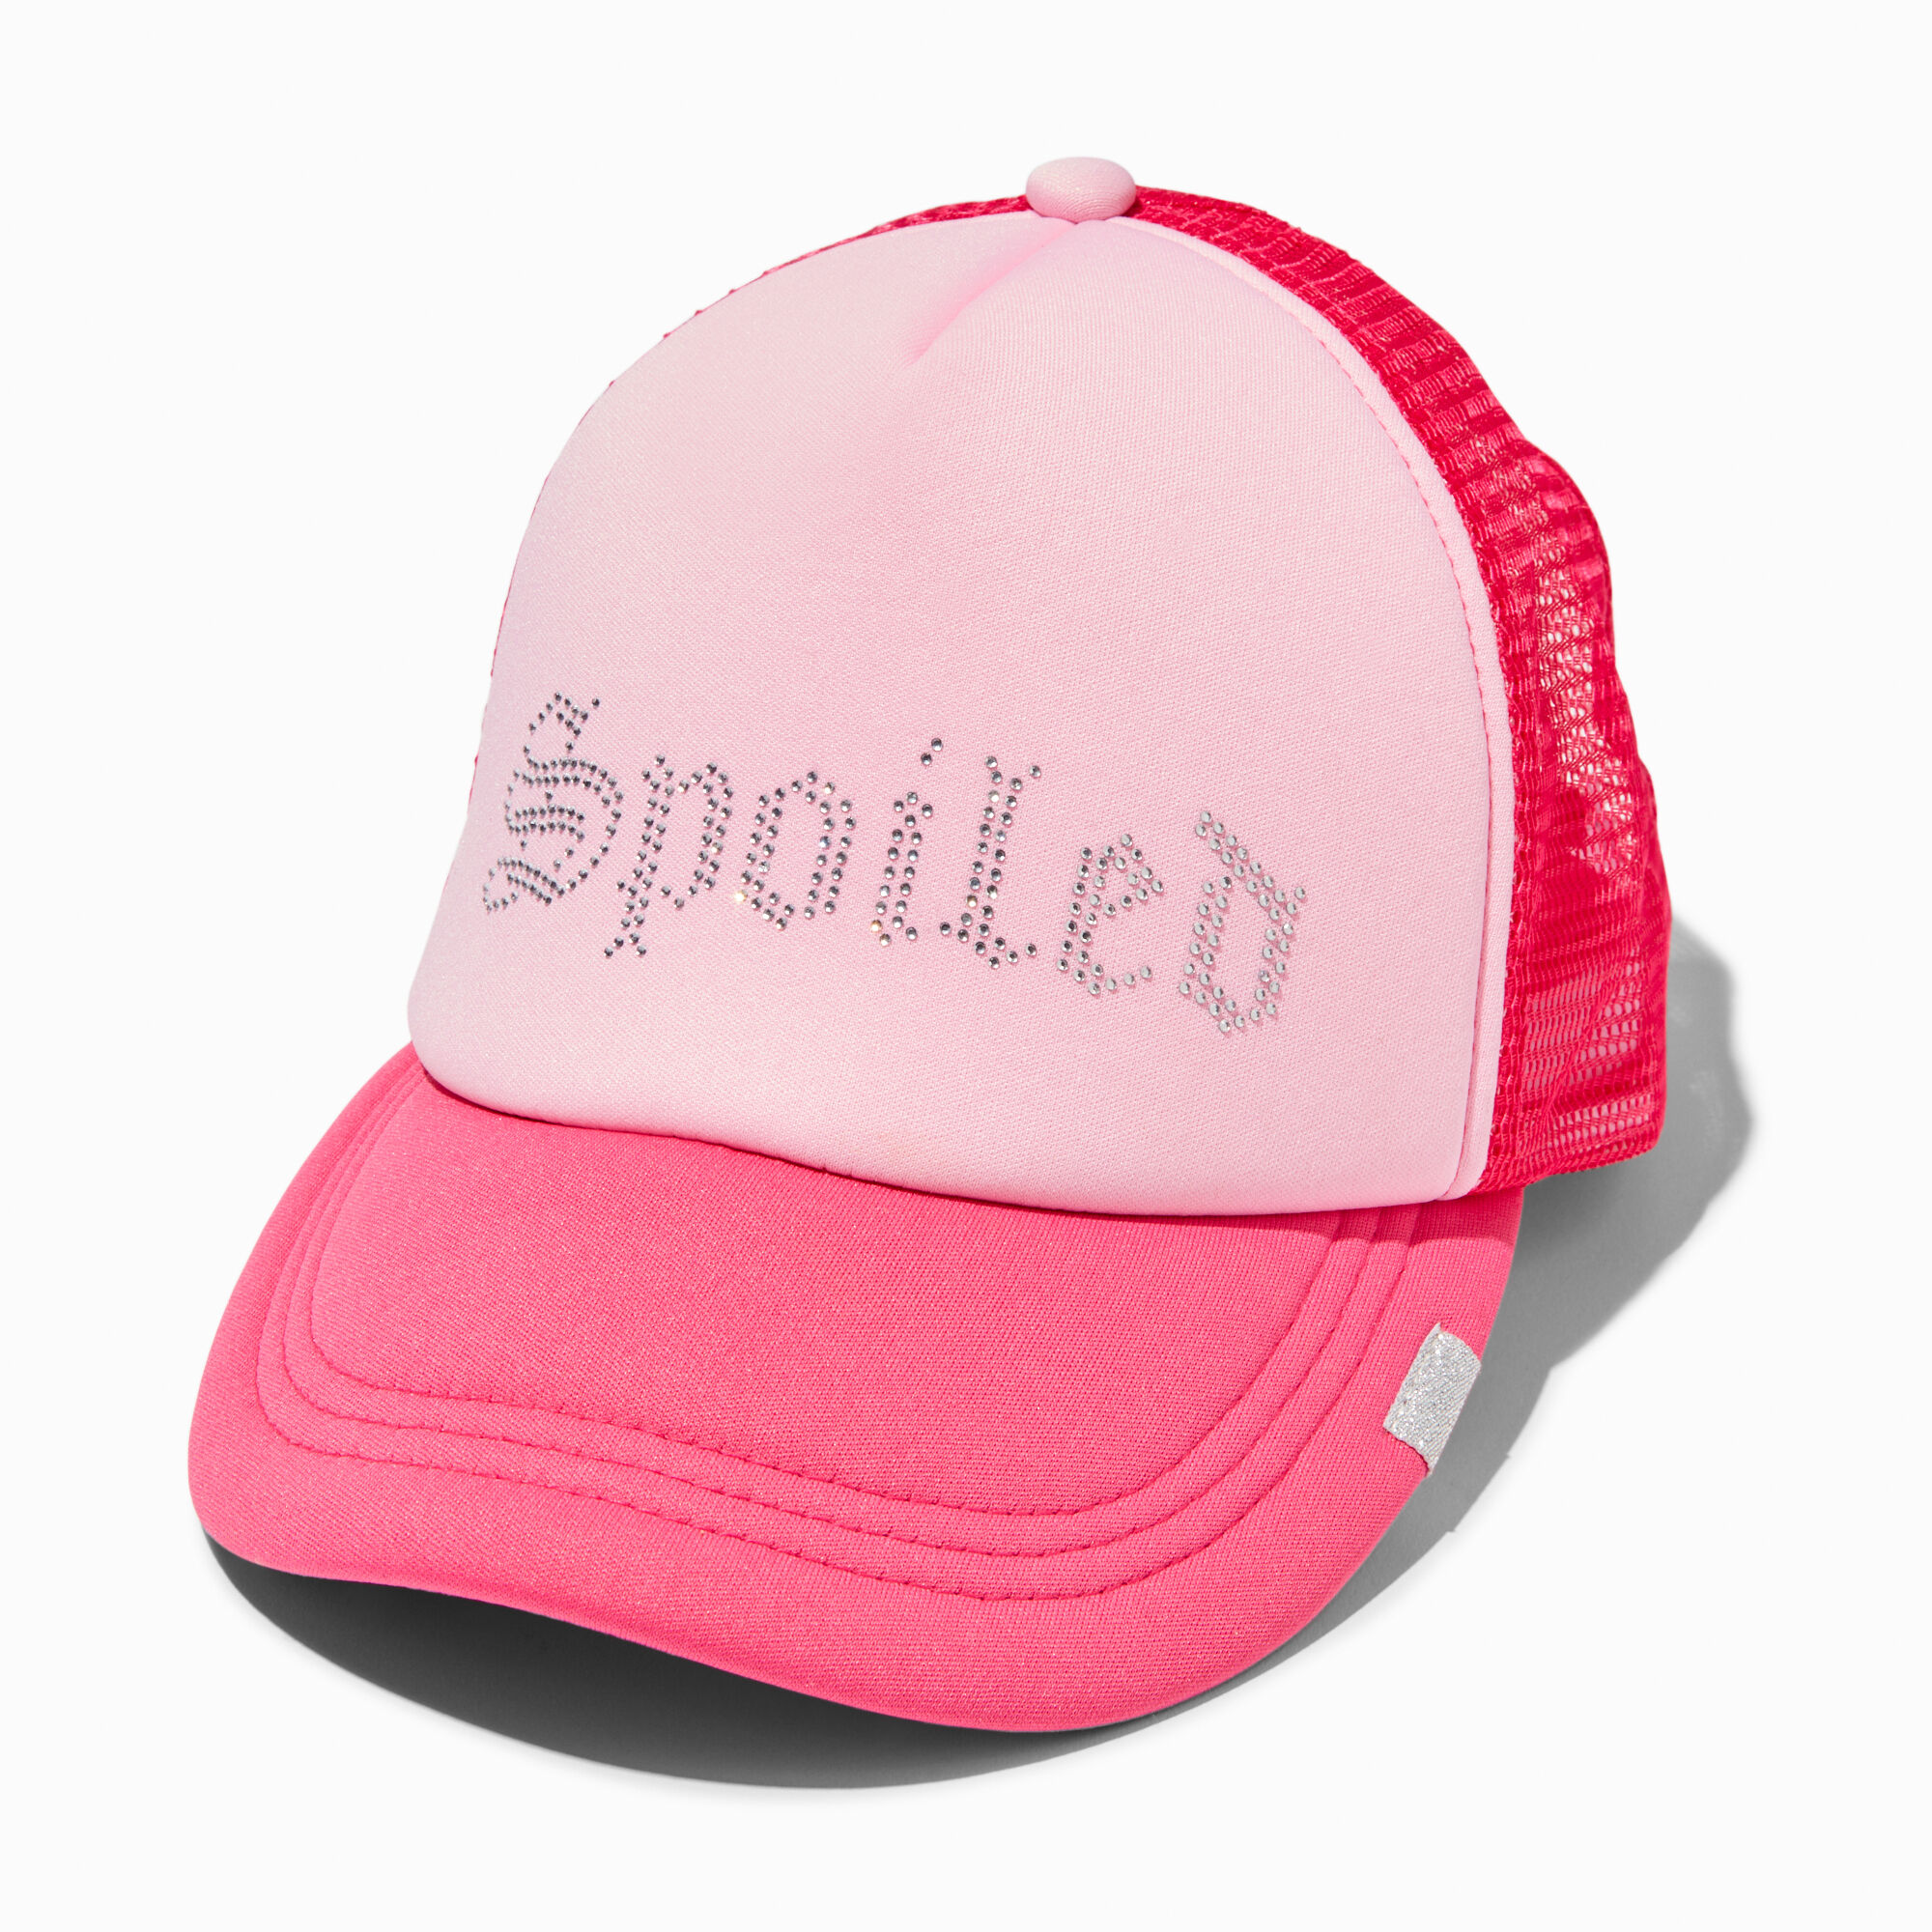 View Claires spoiled Trucker Hat Pink information